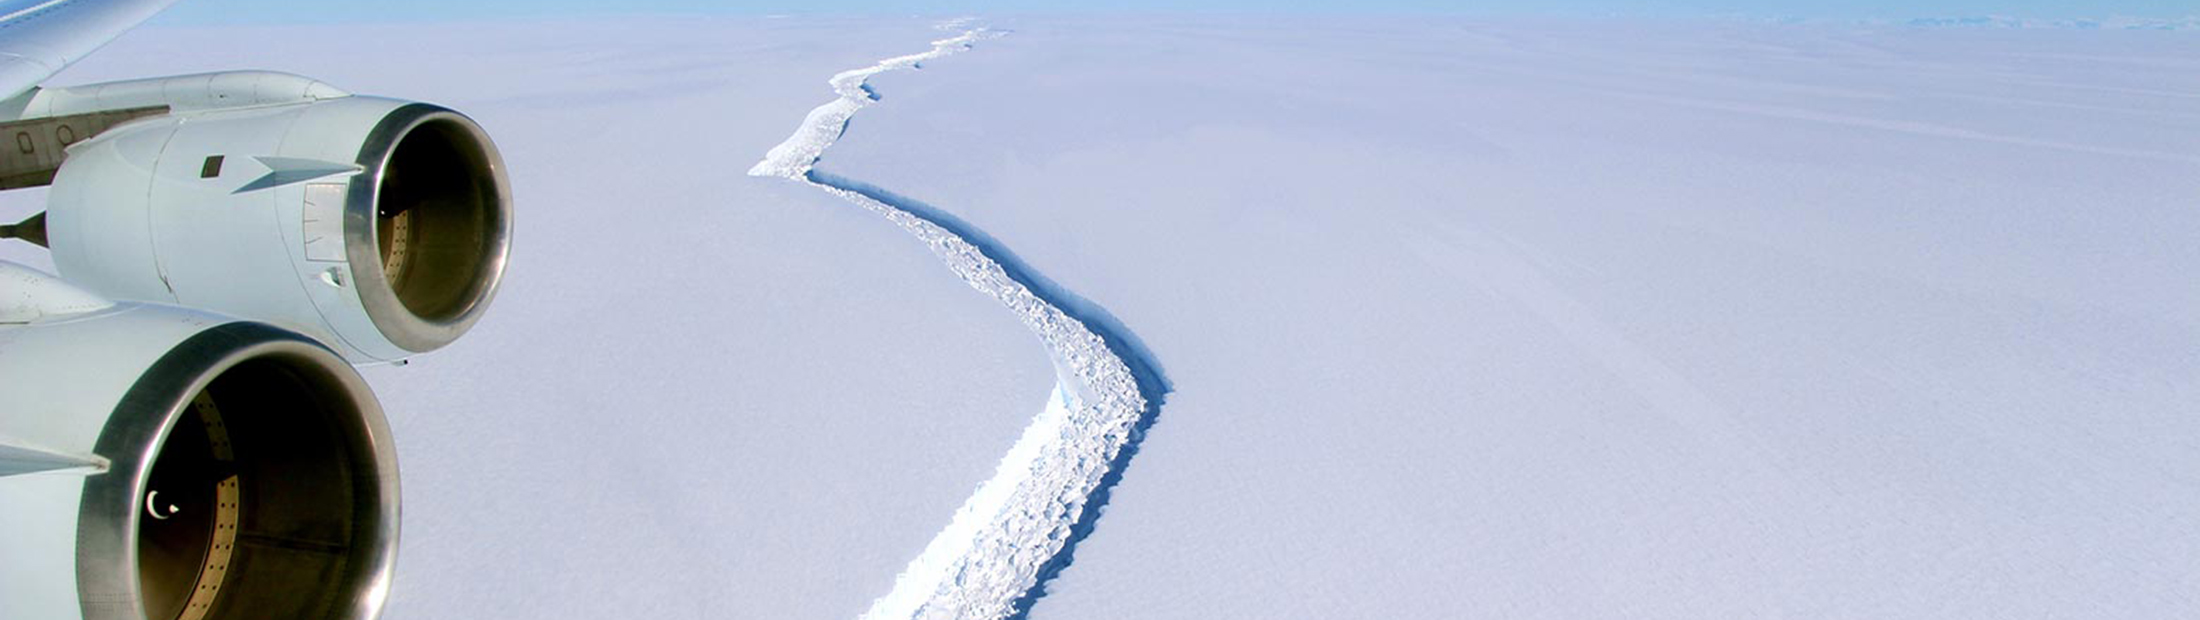 Aerial view of a large crack along the surface of an iceberg